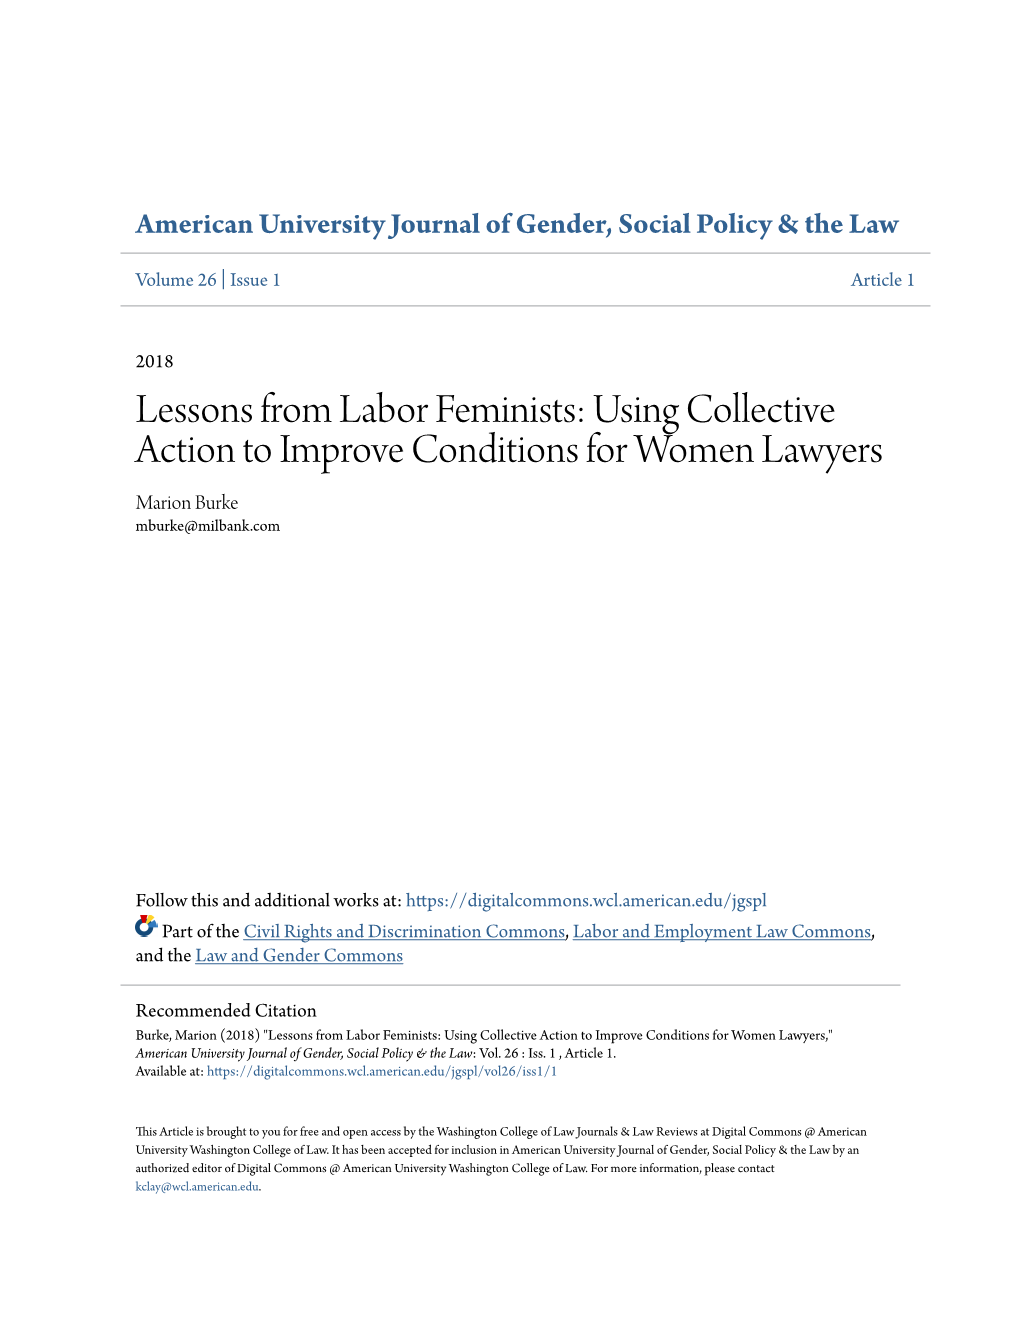 Lessons from Labor Feminists: Using Collective Action to Improve Conditions for Women Lawyers Marion Burke Mburke@Milbank.Com